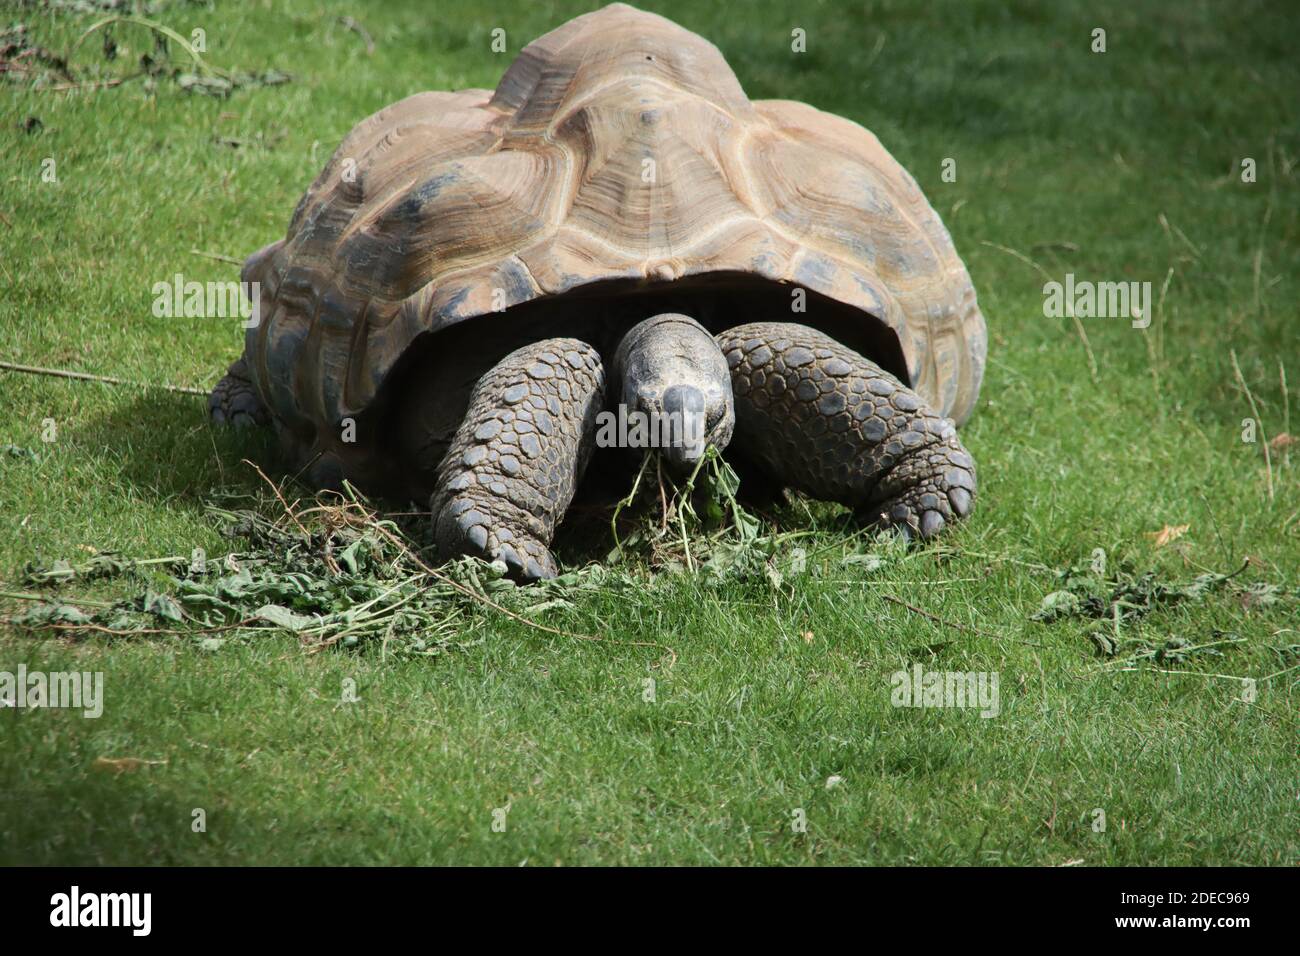 Forest tortoise in the enclosure of the elephants of Ouwehands Zoo in Rhenen the Netherlands Stock Photo